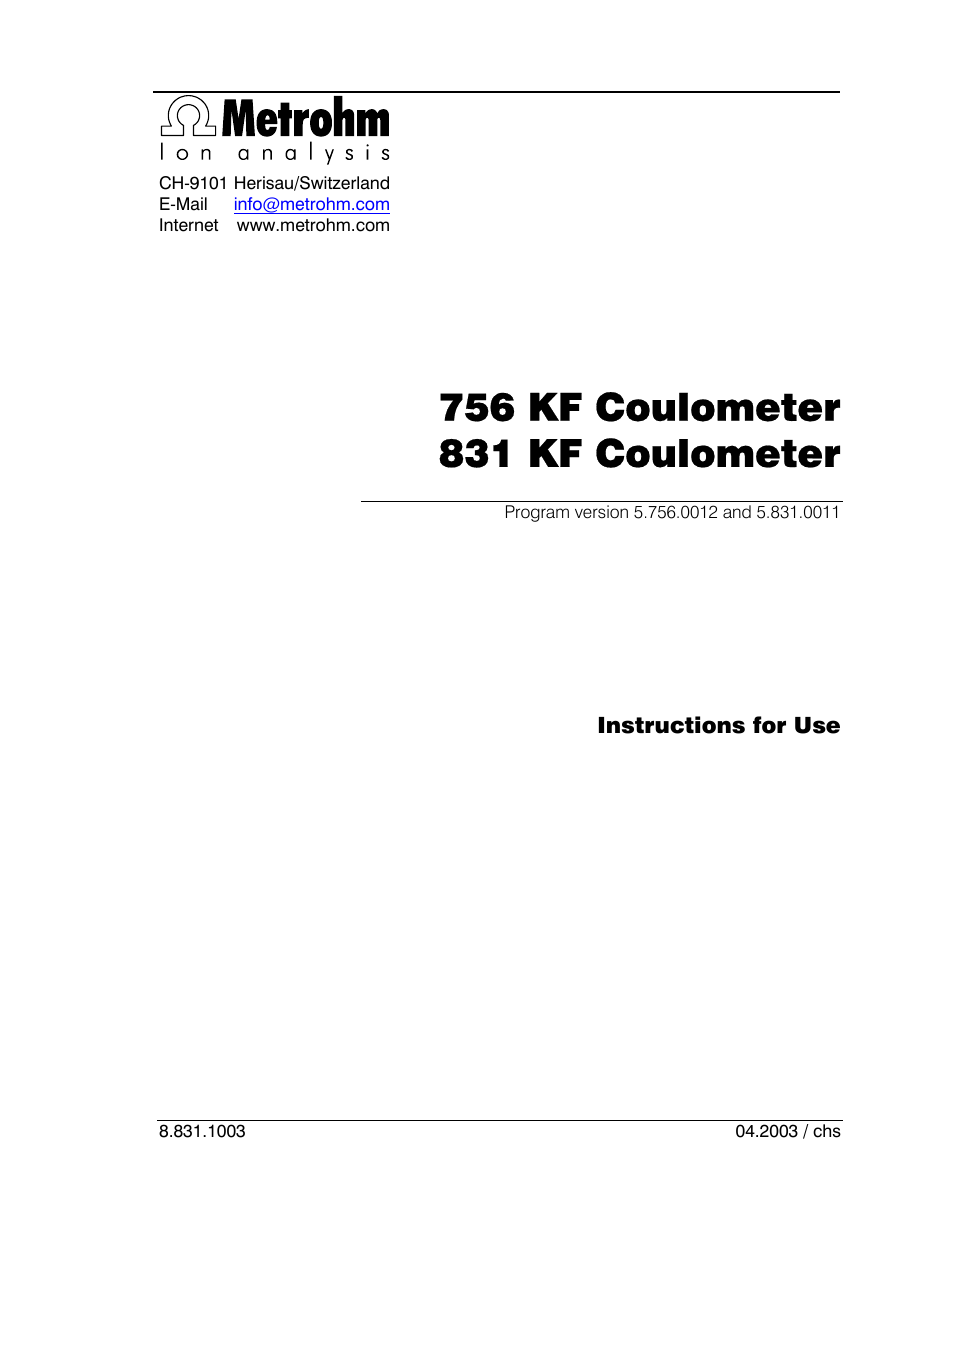 756/831 kf coulometer: instructions for use, 756 kf coulometer, 831 kf coulometer | Instructions for use | Metrohm 756 KF Coulometer User Manual | Page 3 / 163